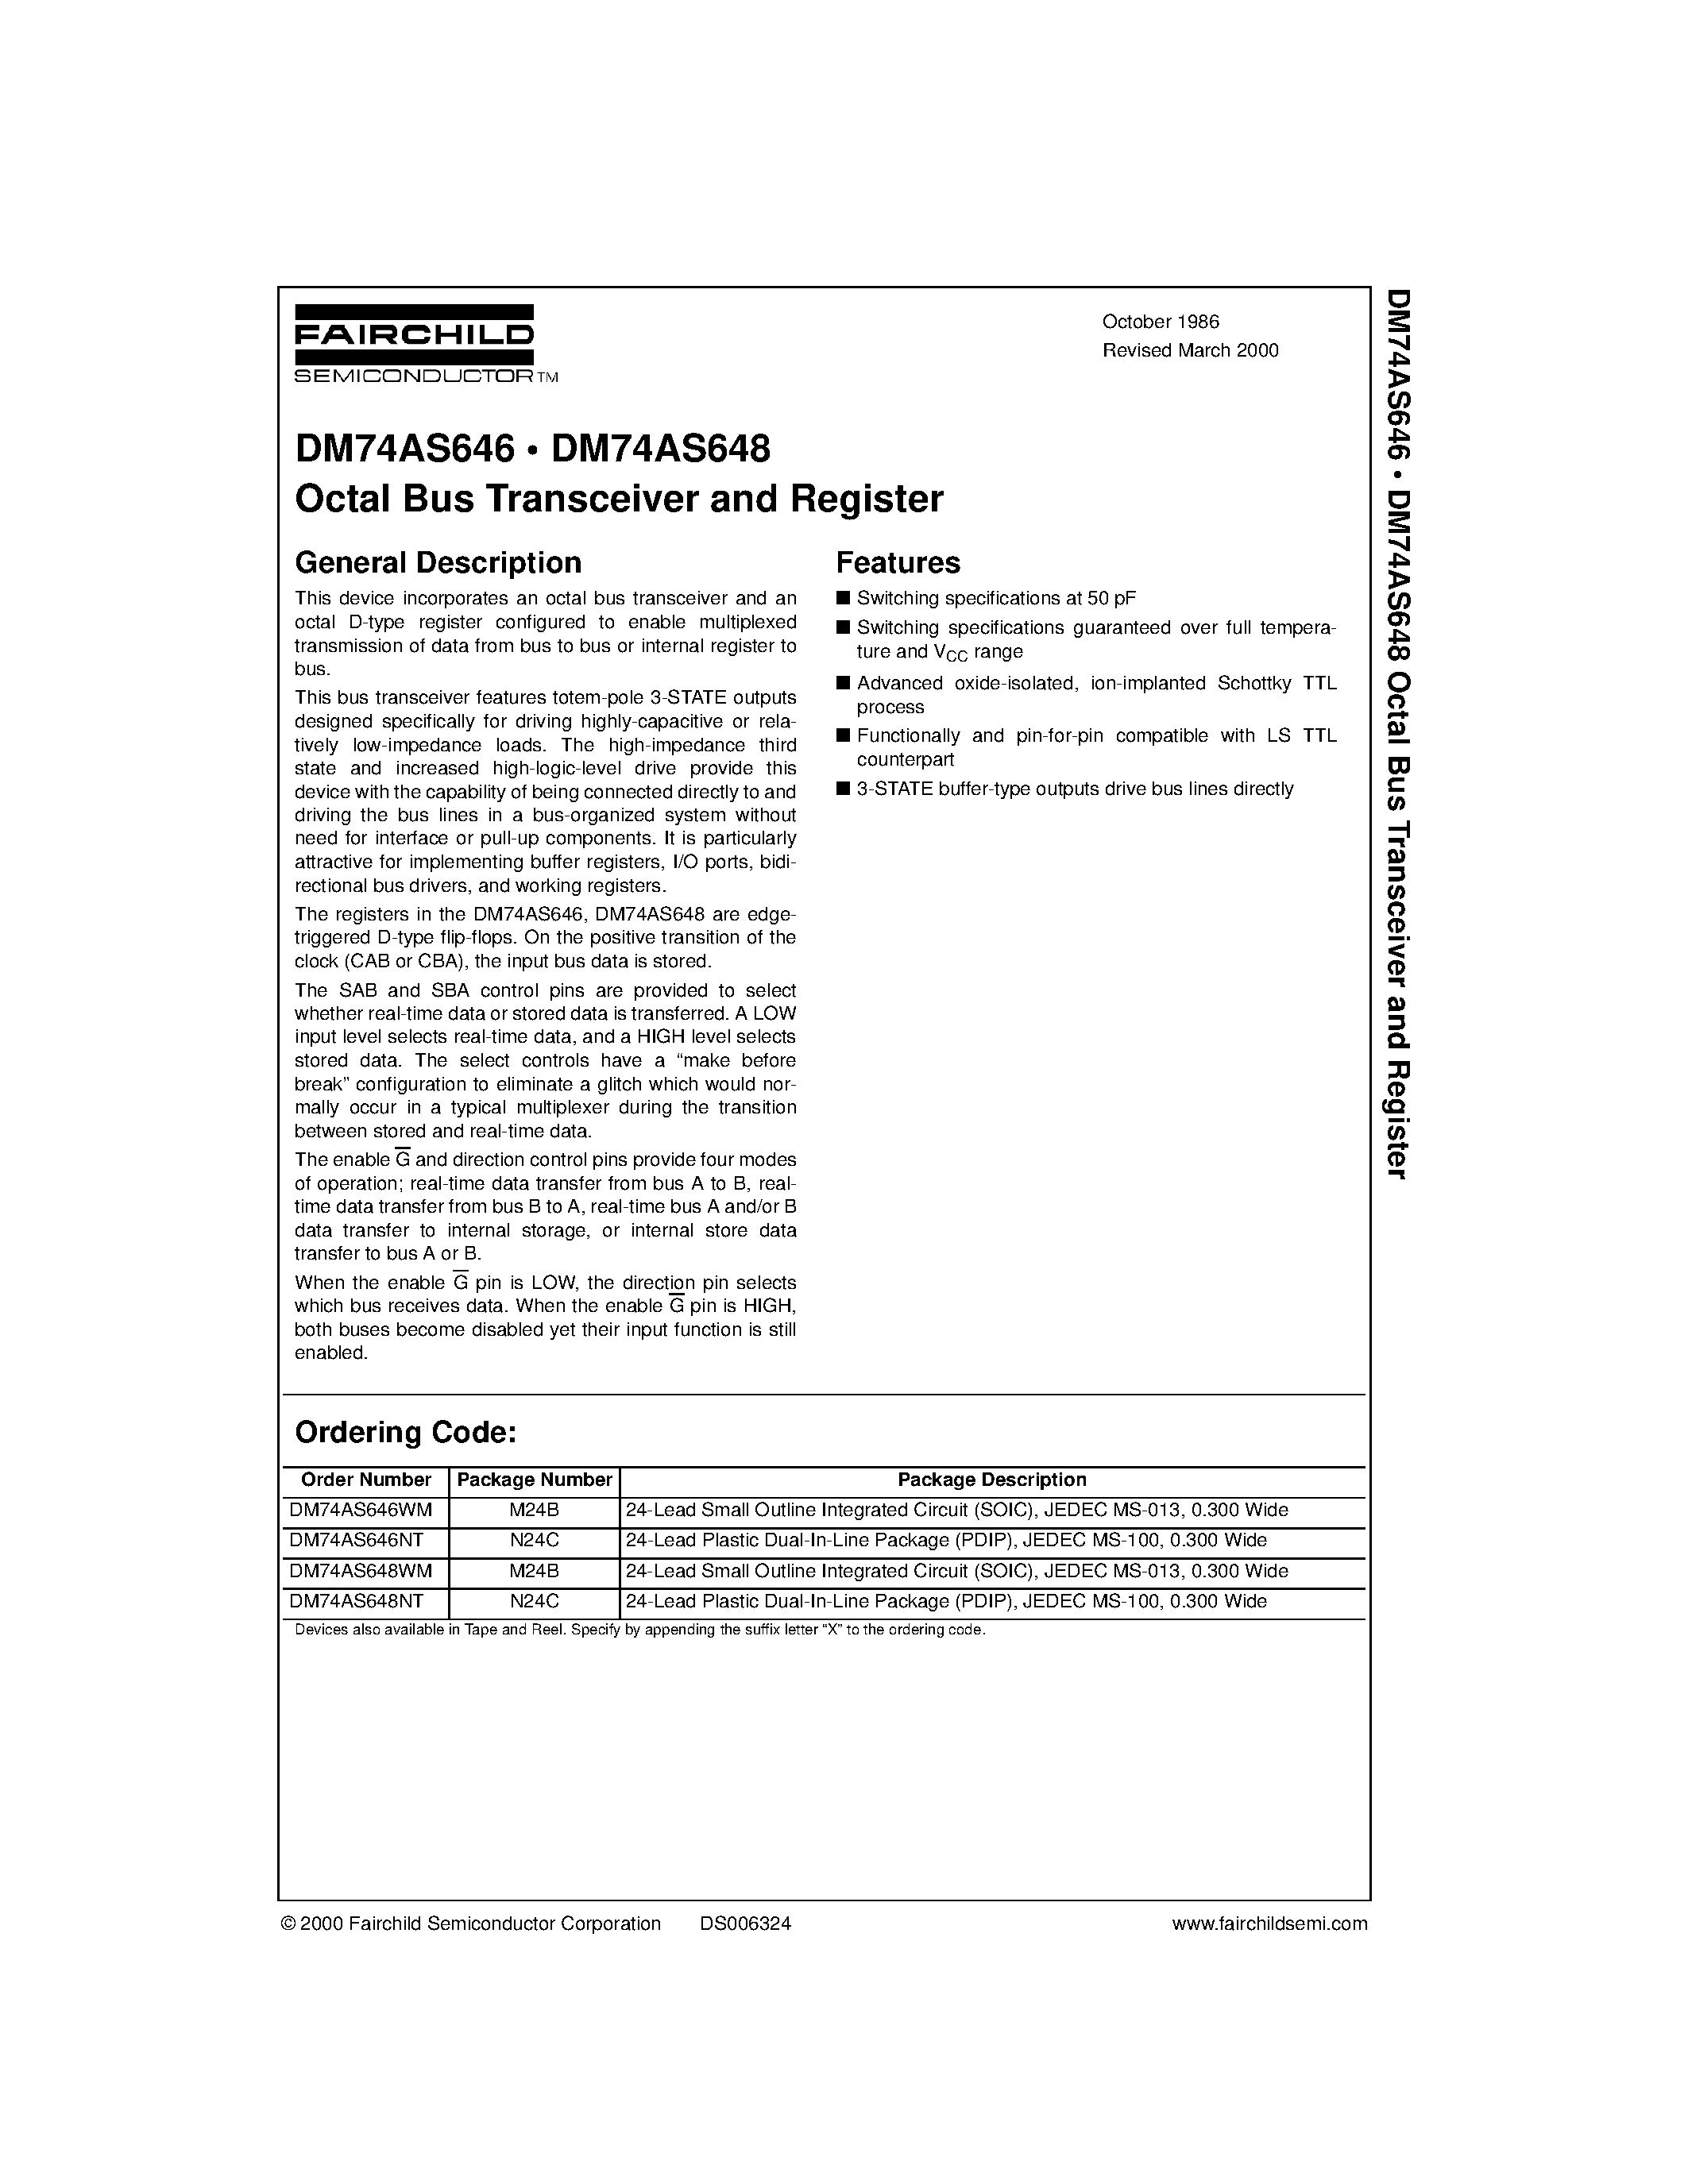 Datasheet DM74AS646 - Octal Bus Transceiver and Register page 1